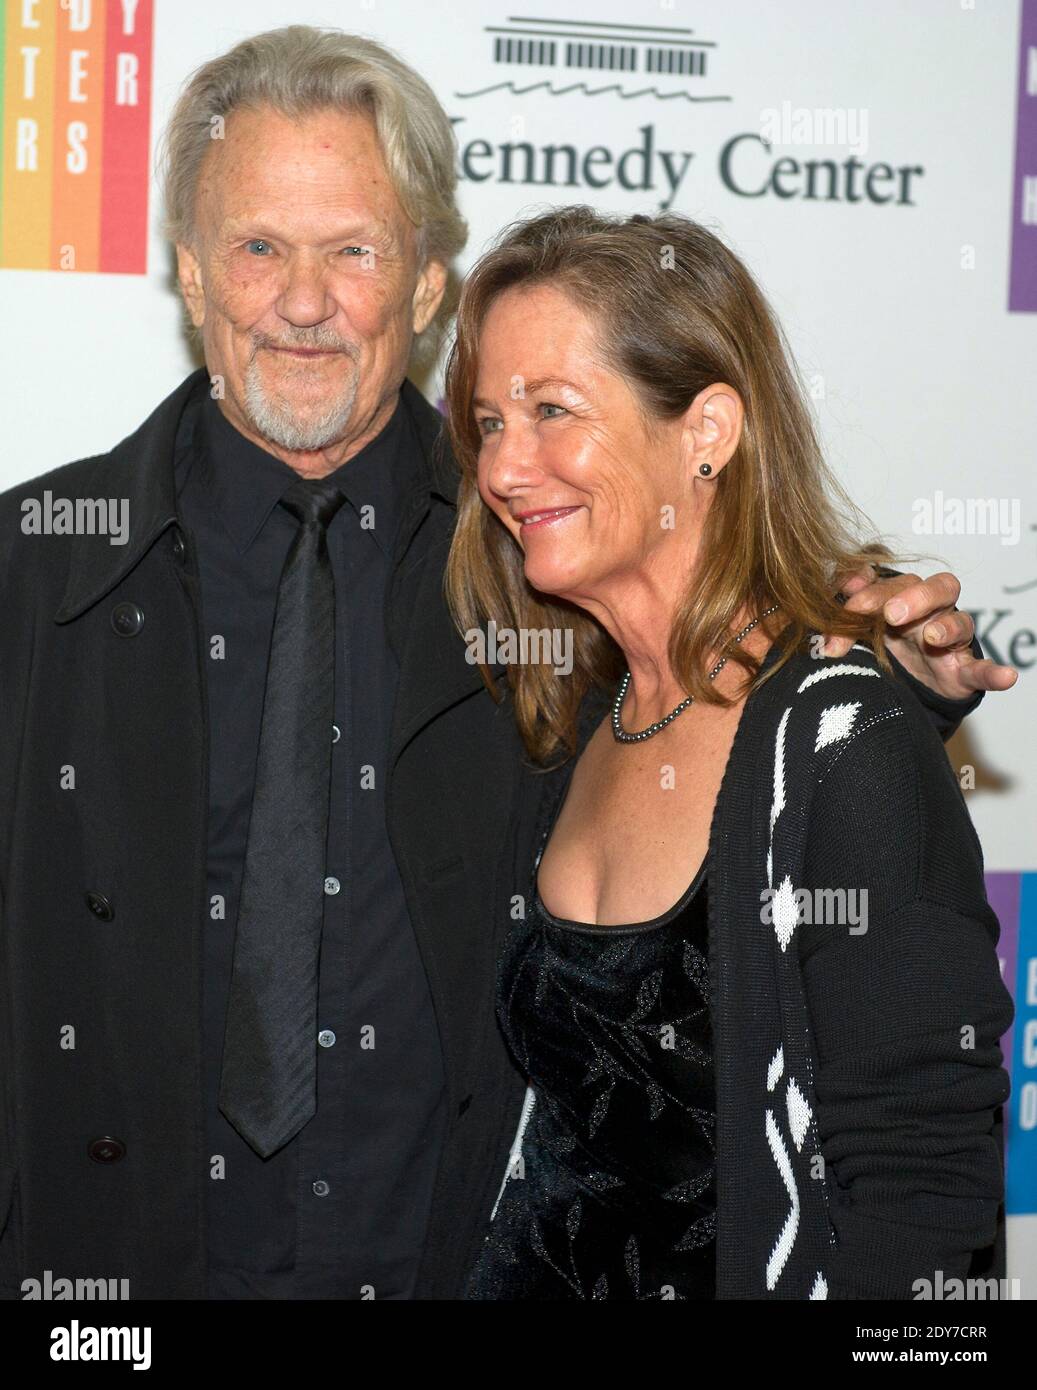 Kris Kristofferson and his wife, Lisa, arrive for the formal Artist's Dinner honoring the recipients of the 2014 Kennedy Center Honors hosted by United States Secretary of State John F. Kerry at the U.S. Department of State in Washington, DC, USA, on Saturday, December 6, 2014. The 2014 honorees are: singer Al Green, actor and filmmaker Tom Hanks, ballerina Patricia McBride, singer-songwriter Sting, and comedienne Lily Tomlin. Photo by Ron Sachs/Pool/ABACAPRESS.COM Stock Photo